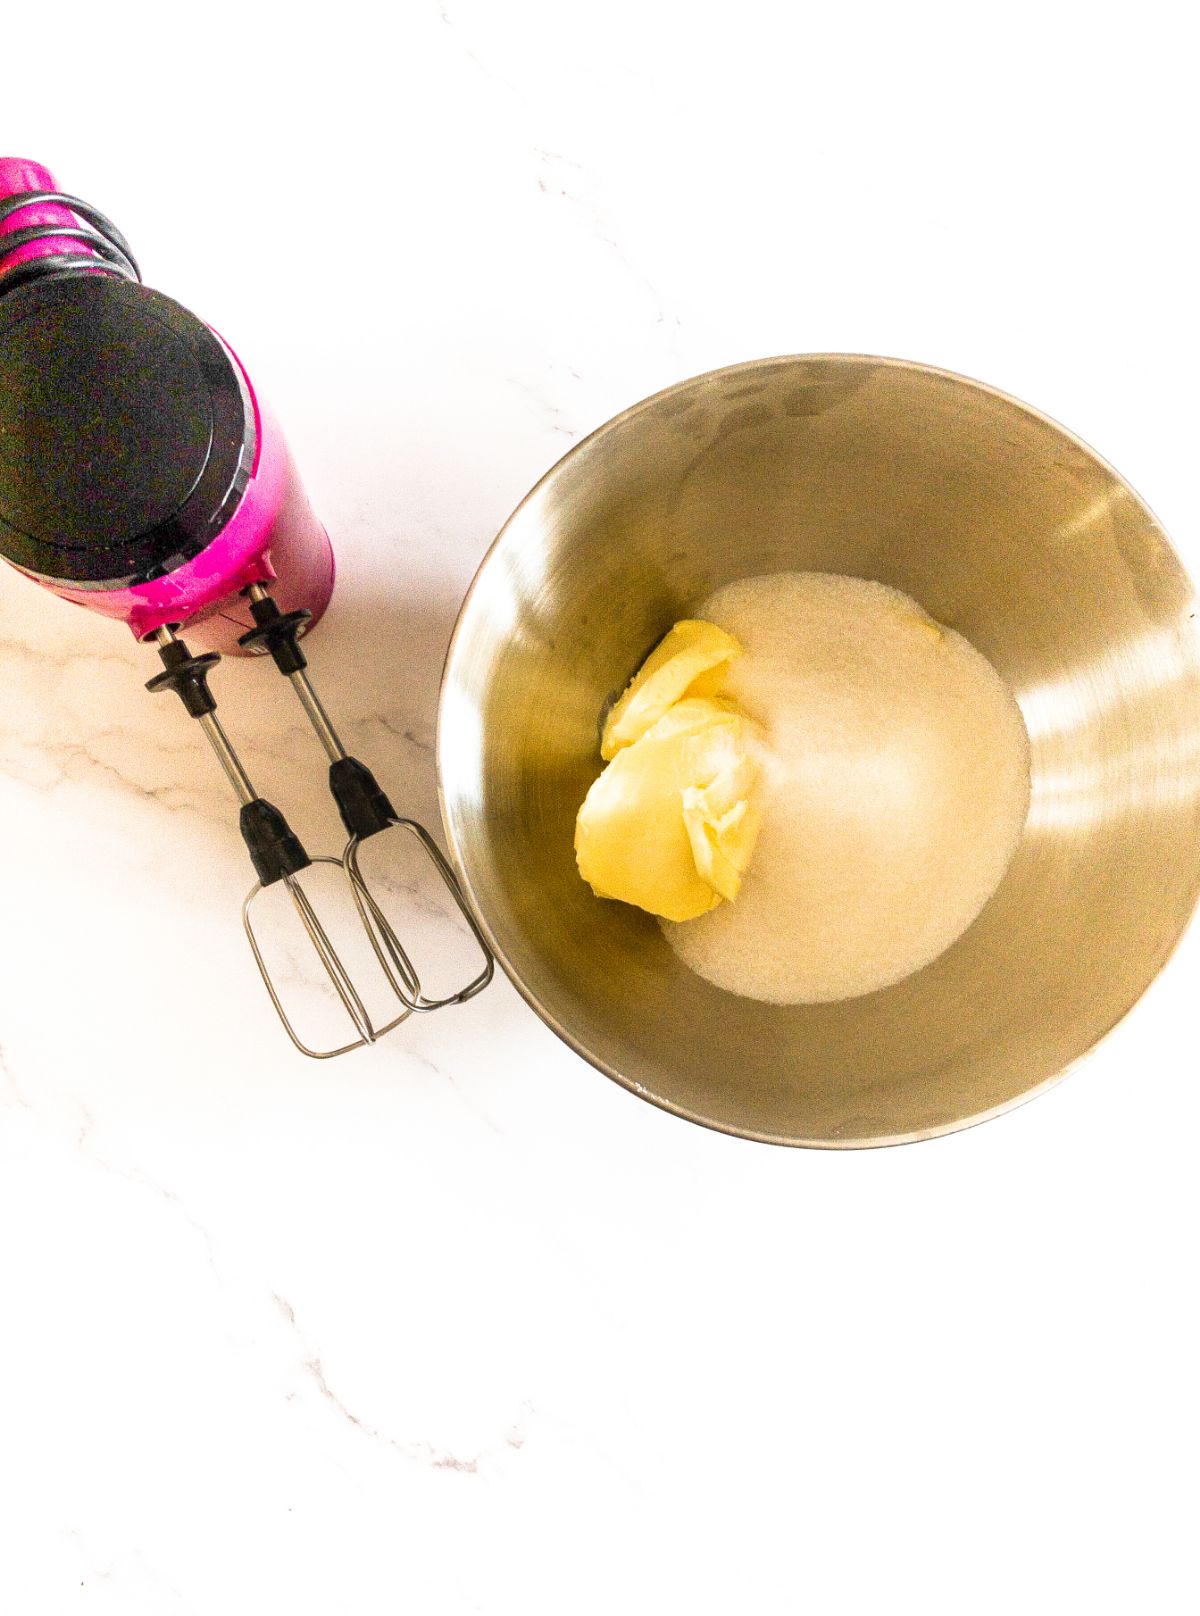 An image of butter and sugar in a mixing bowl ready to be whisked.